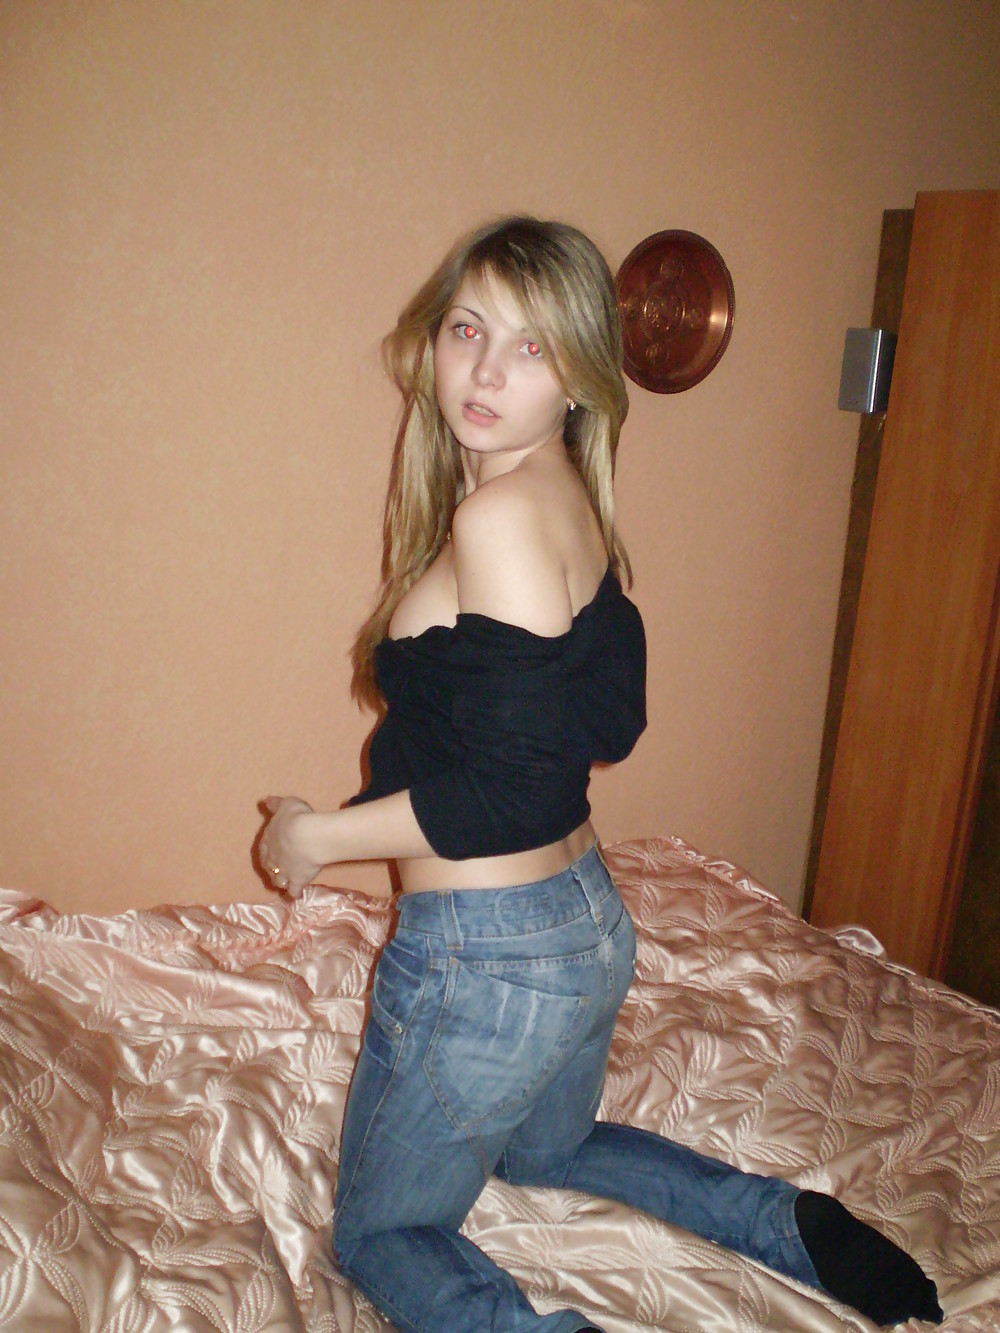 AMATEUR RUSSIAN TEEN pict gal